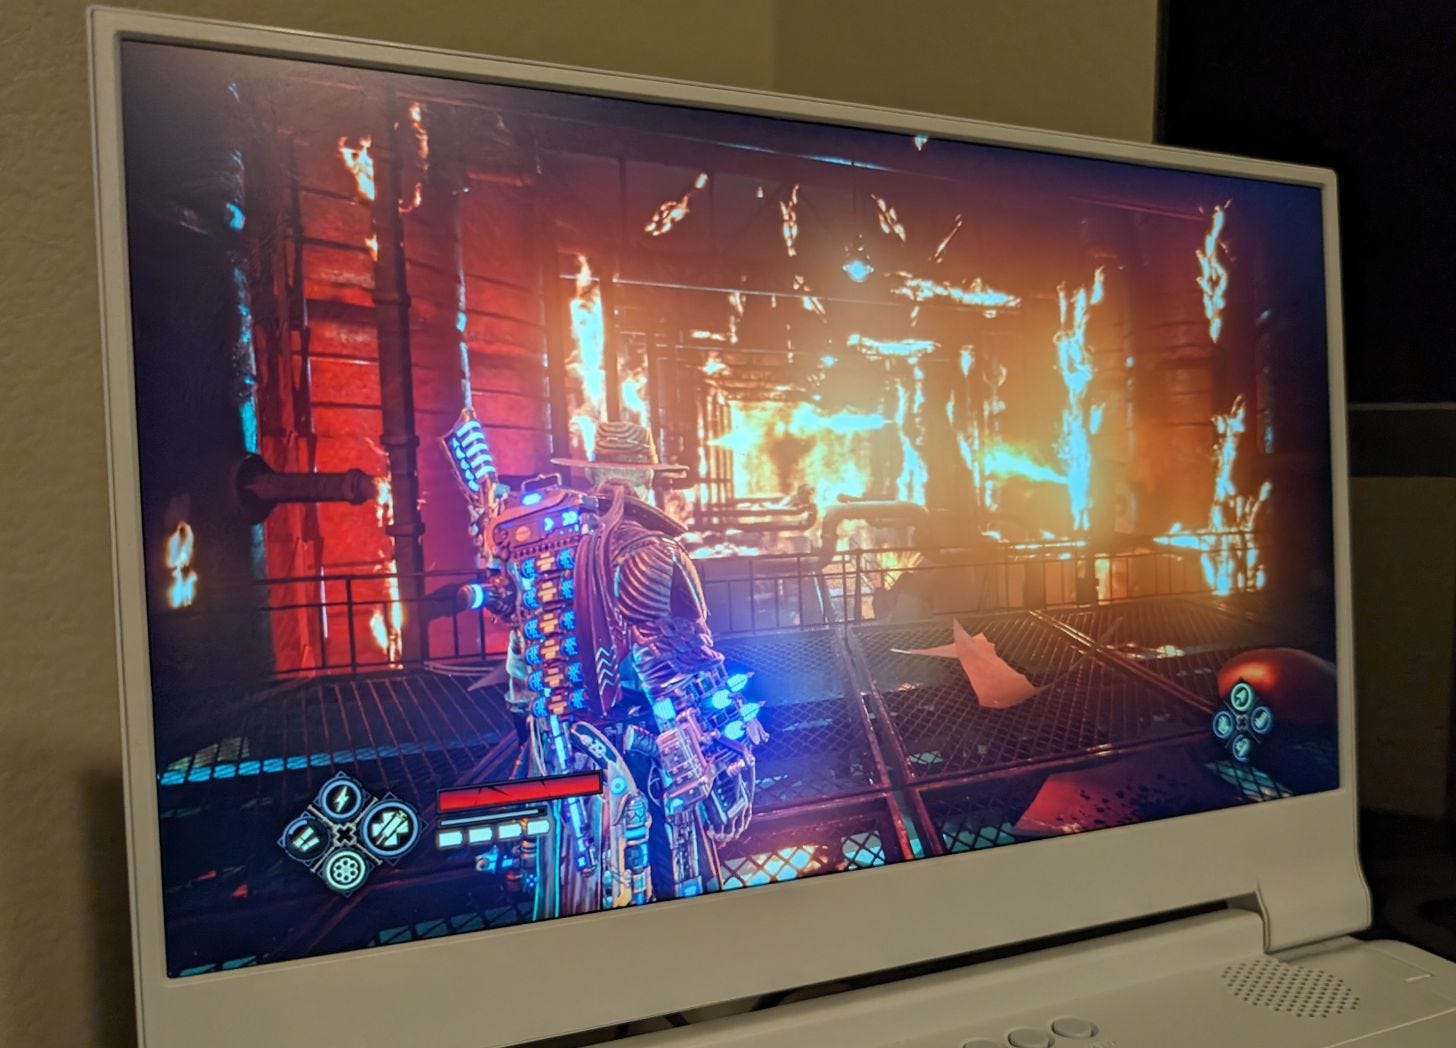 Playing Evil West on the 14-inch portable monitor